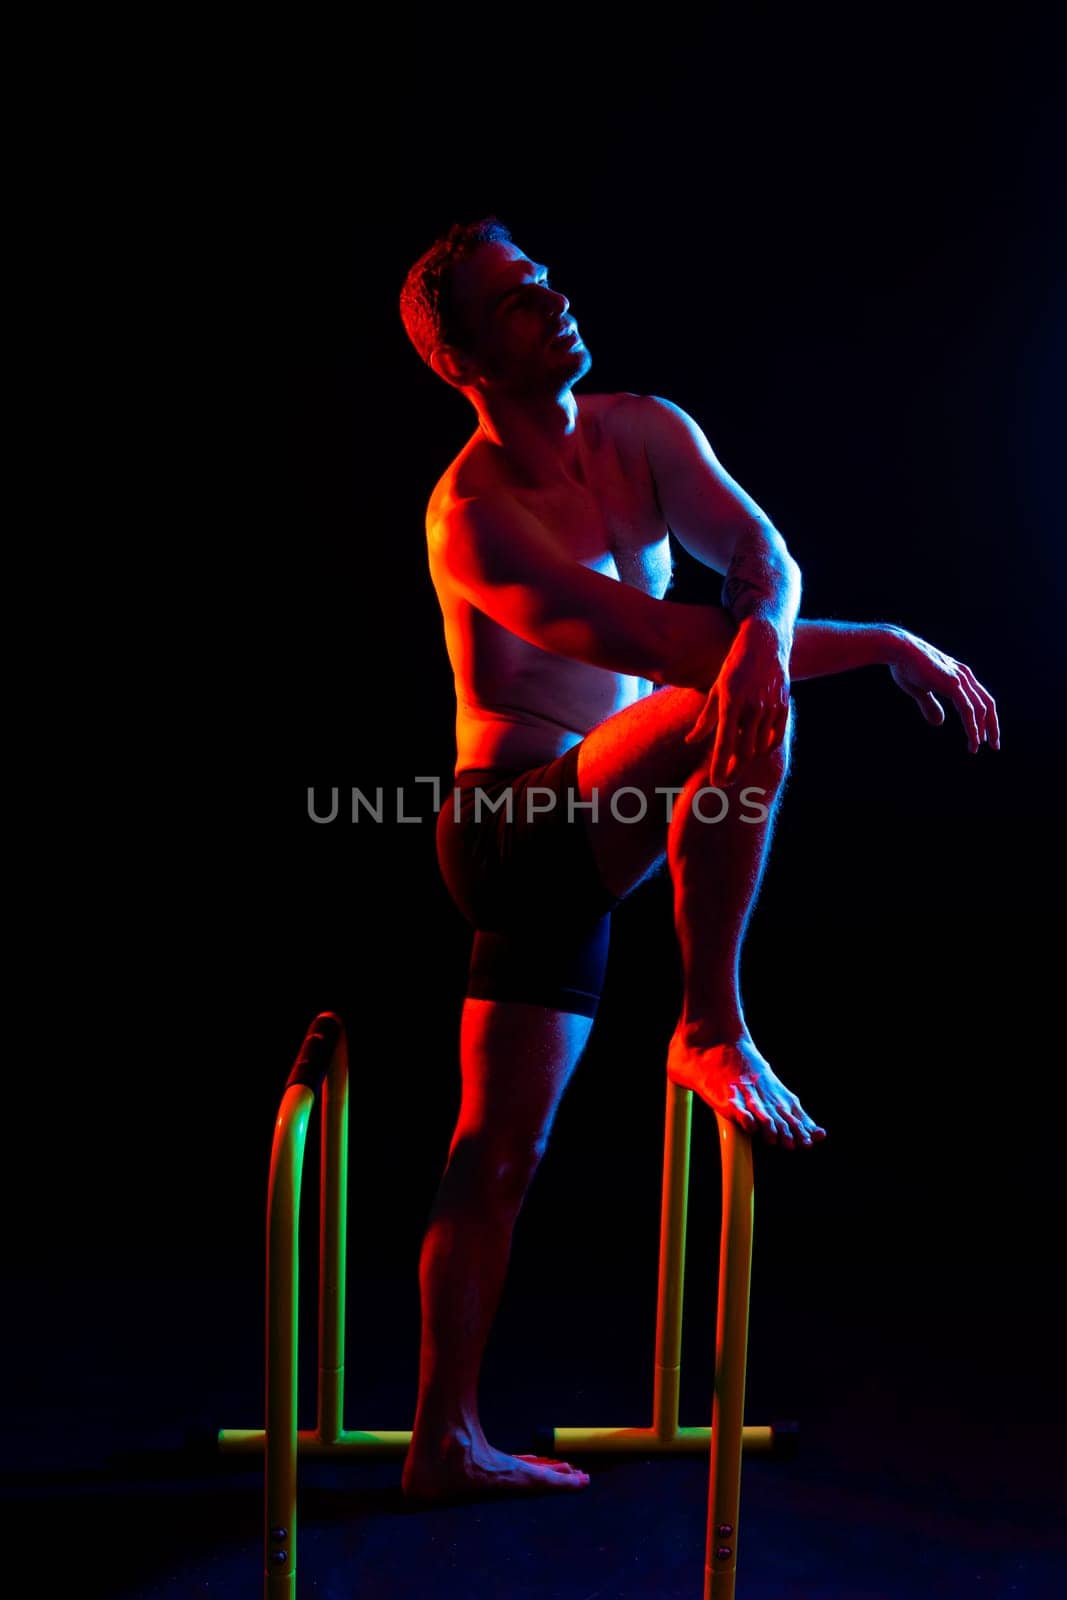 Front and side view photo of strong young man exercising on parallel bars in studio.